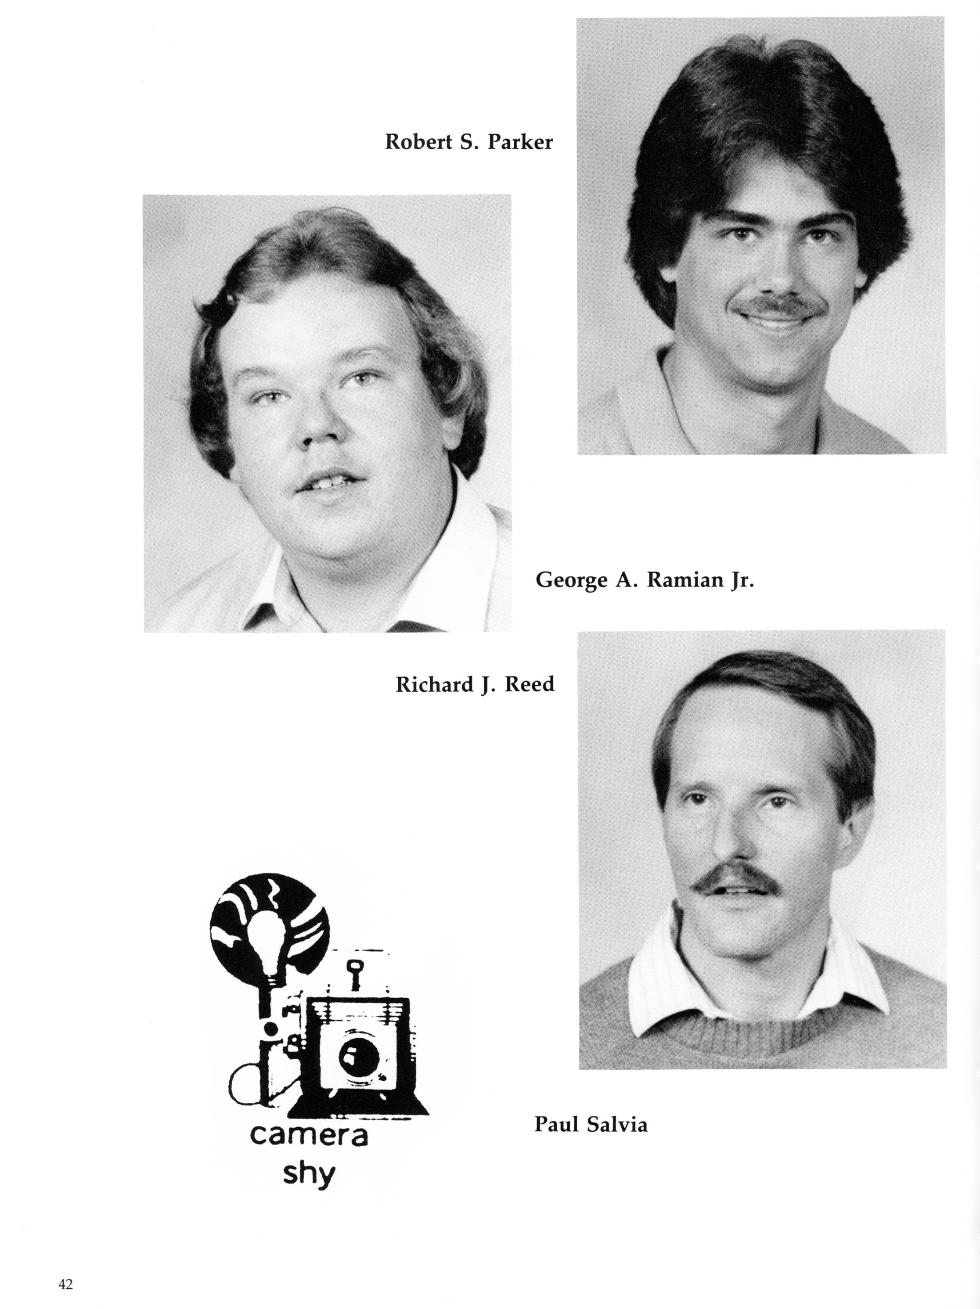 Worcester Industrial Technical Institute - Industrial Electronics Class of 1987